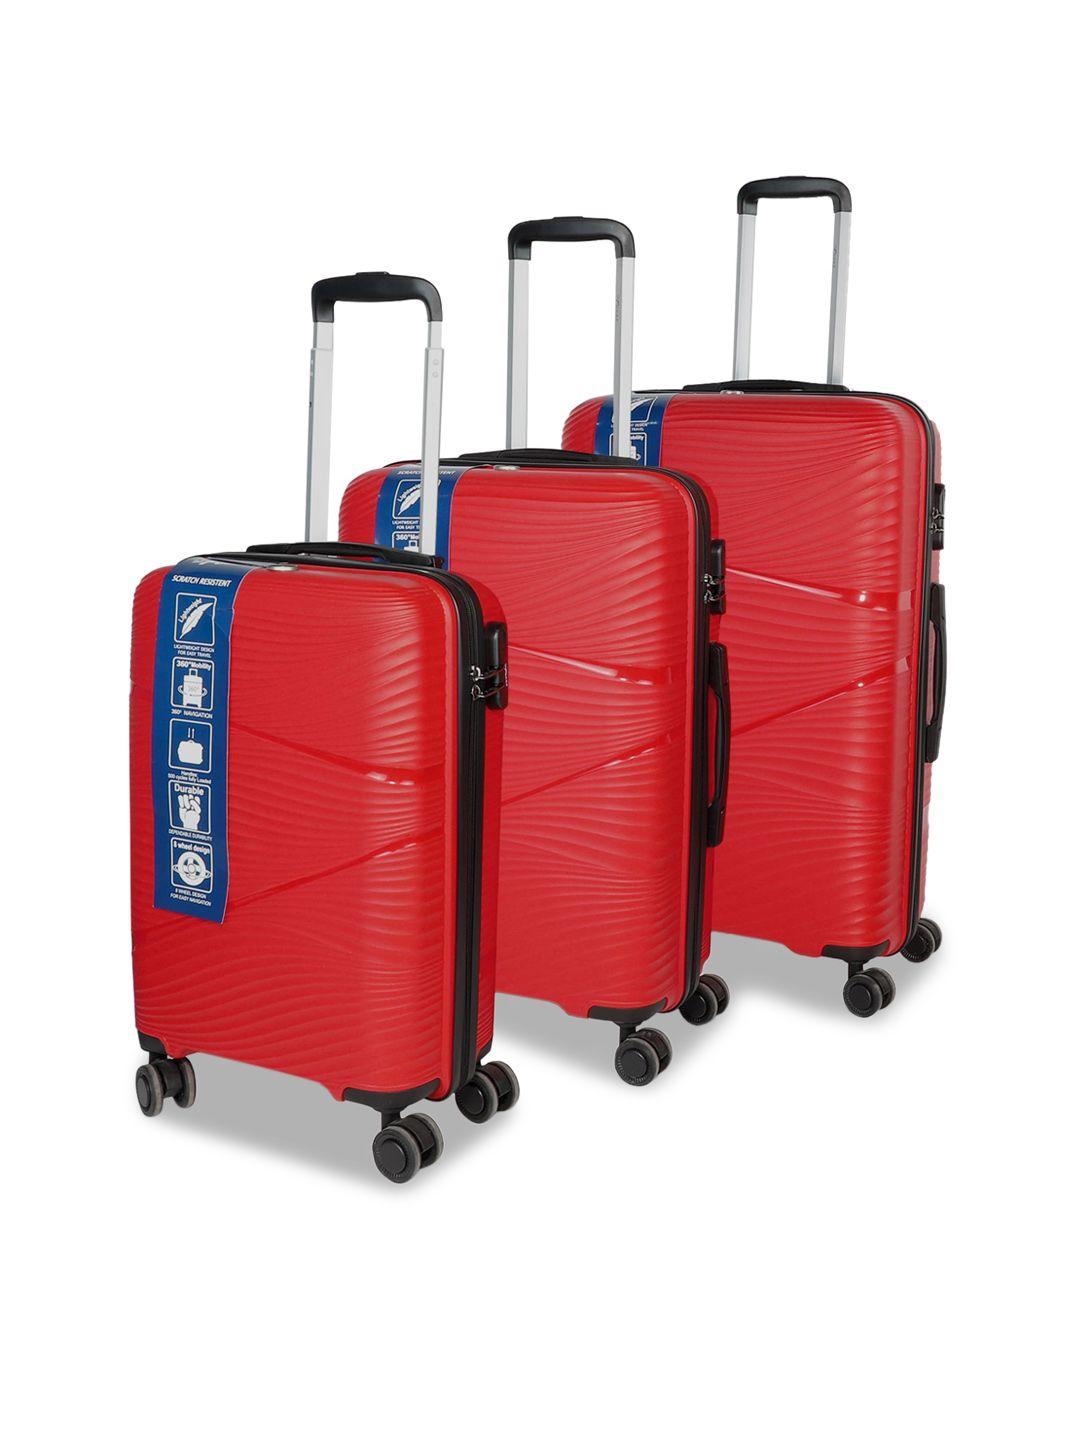 f gear set of 3 hard-sided trolley suitcases